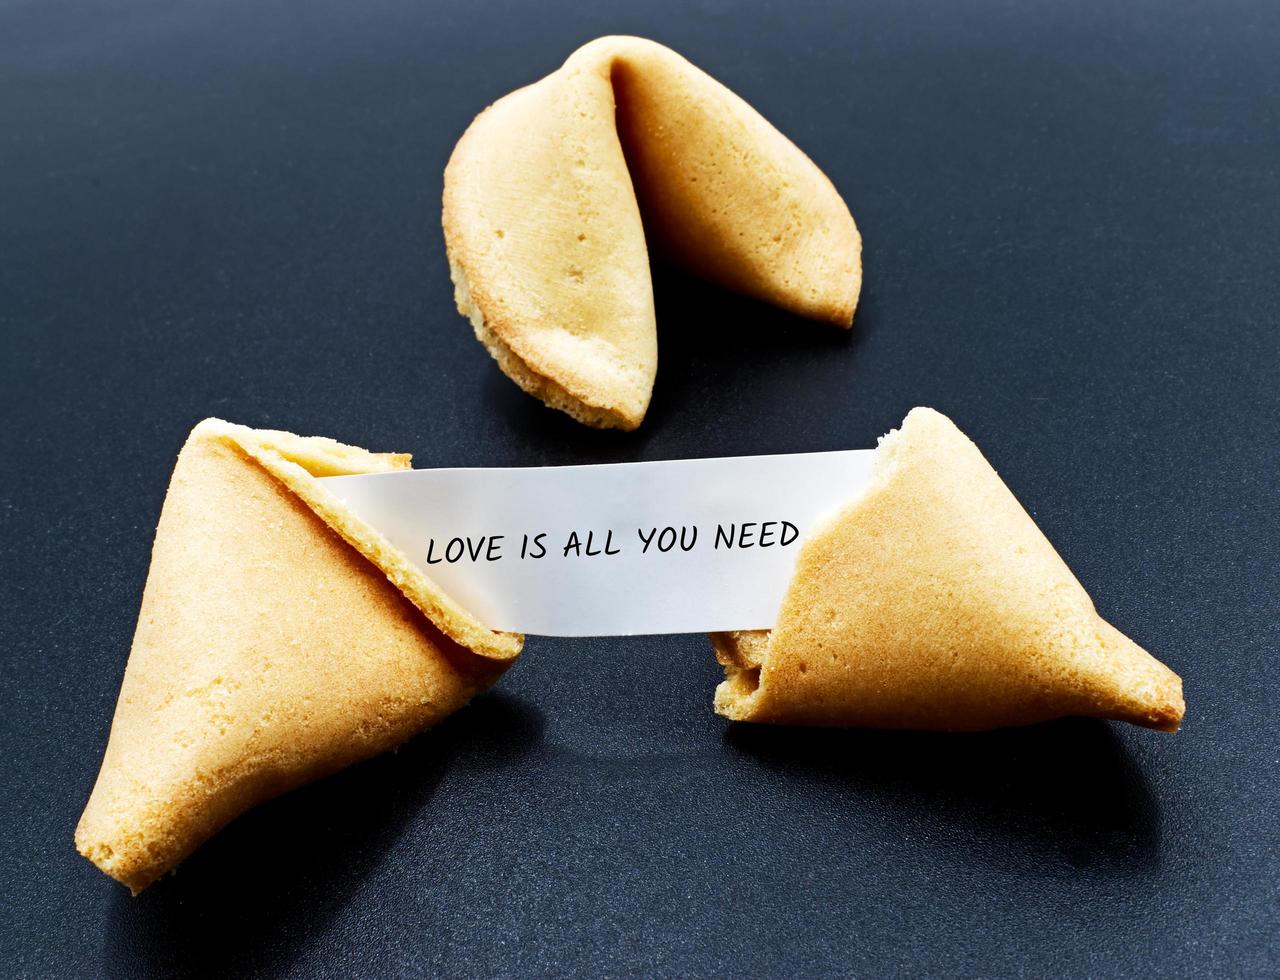 Love is all you need. Motivational quote in a cracked Chinese cookie photo